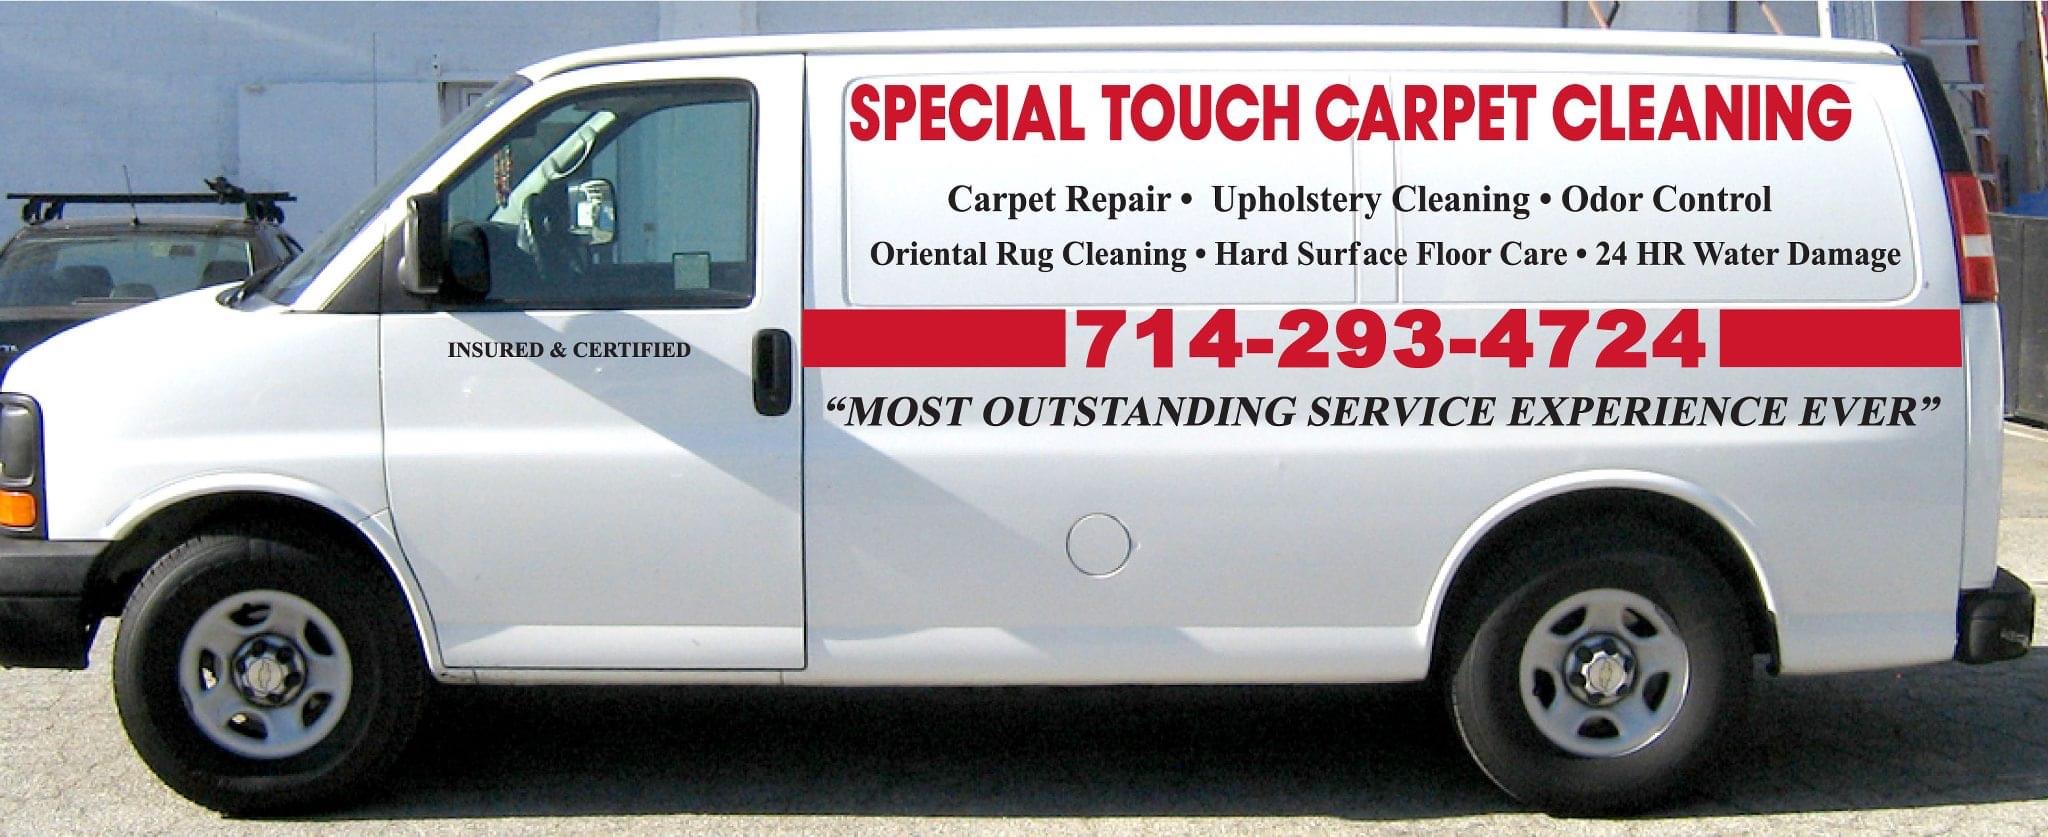 Special Touch Carpet Cleaning